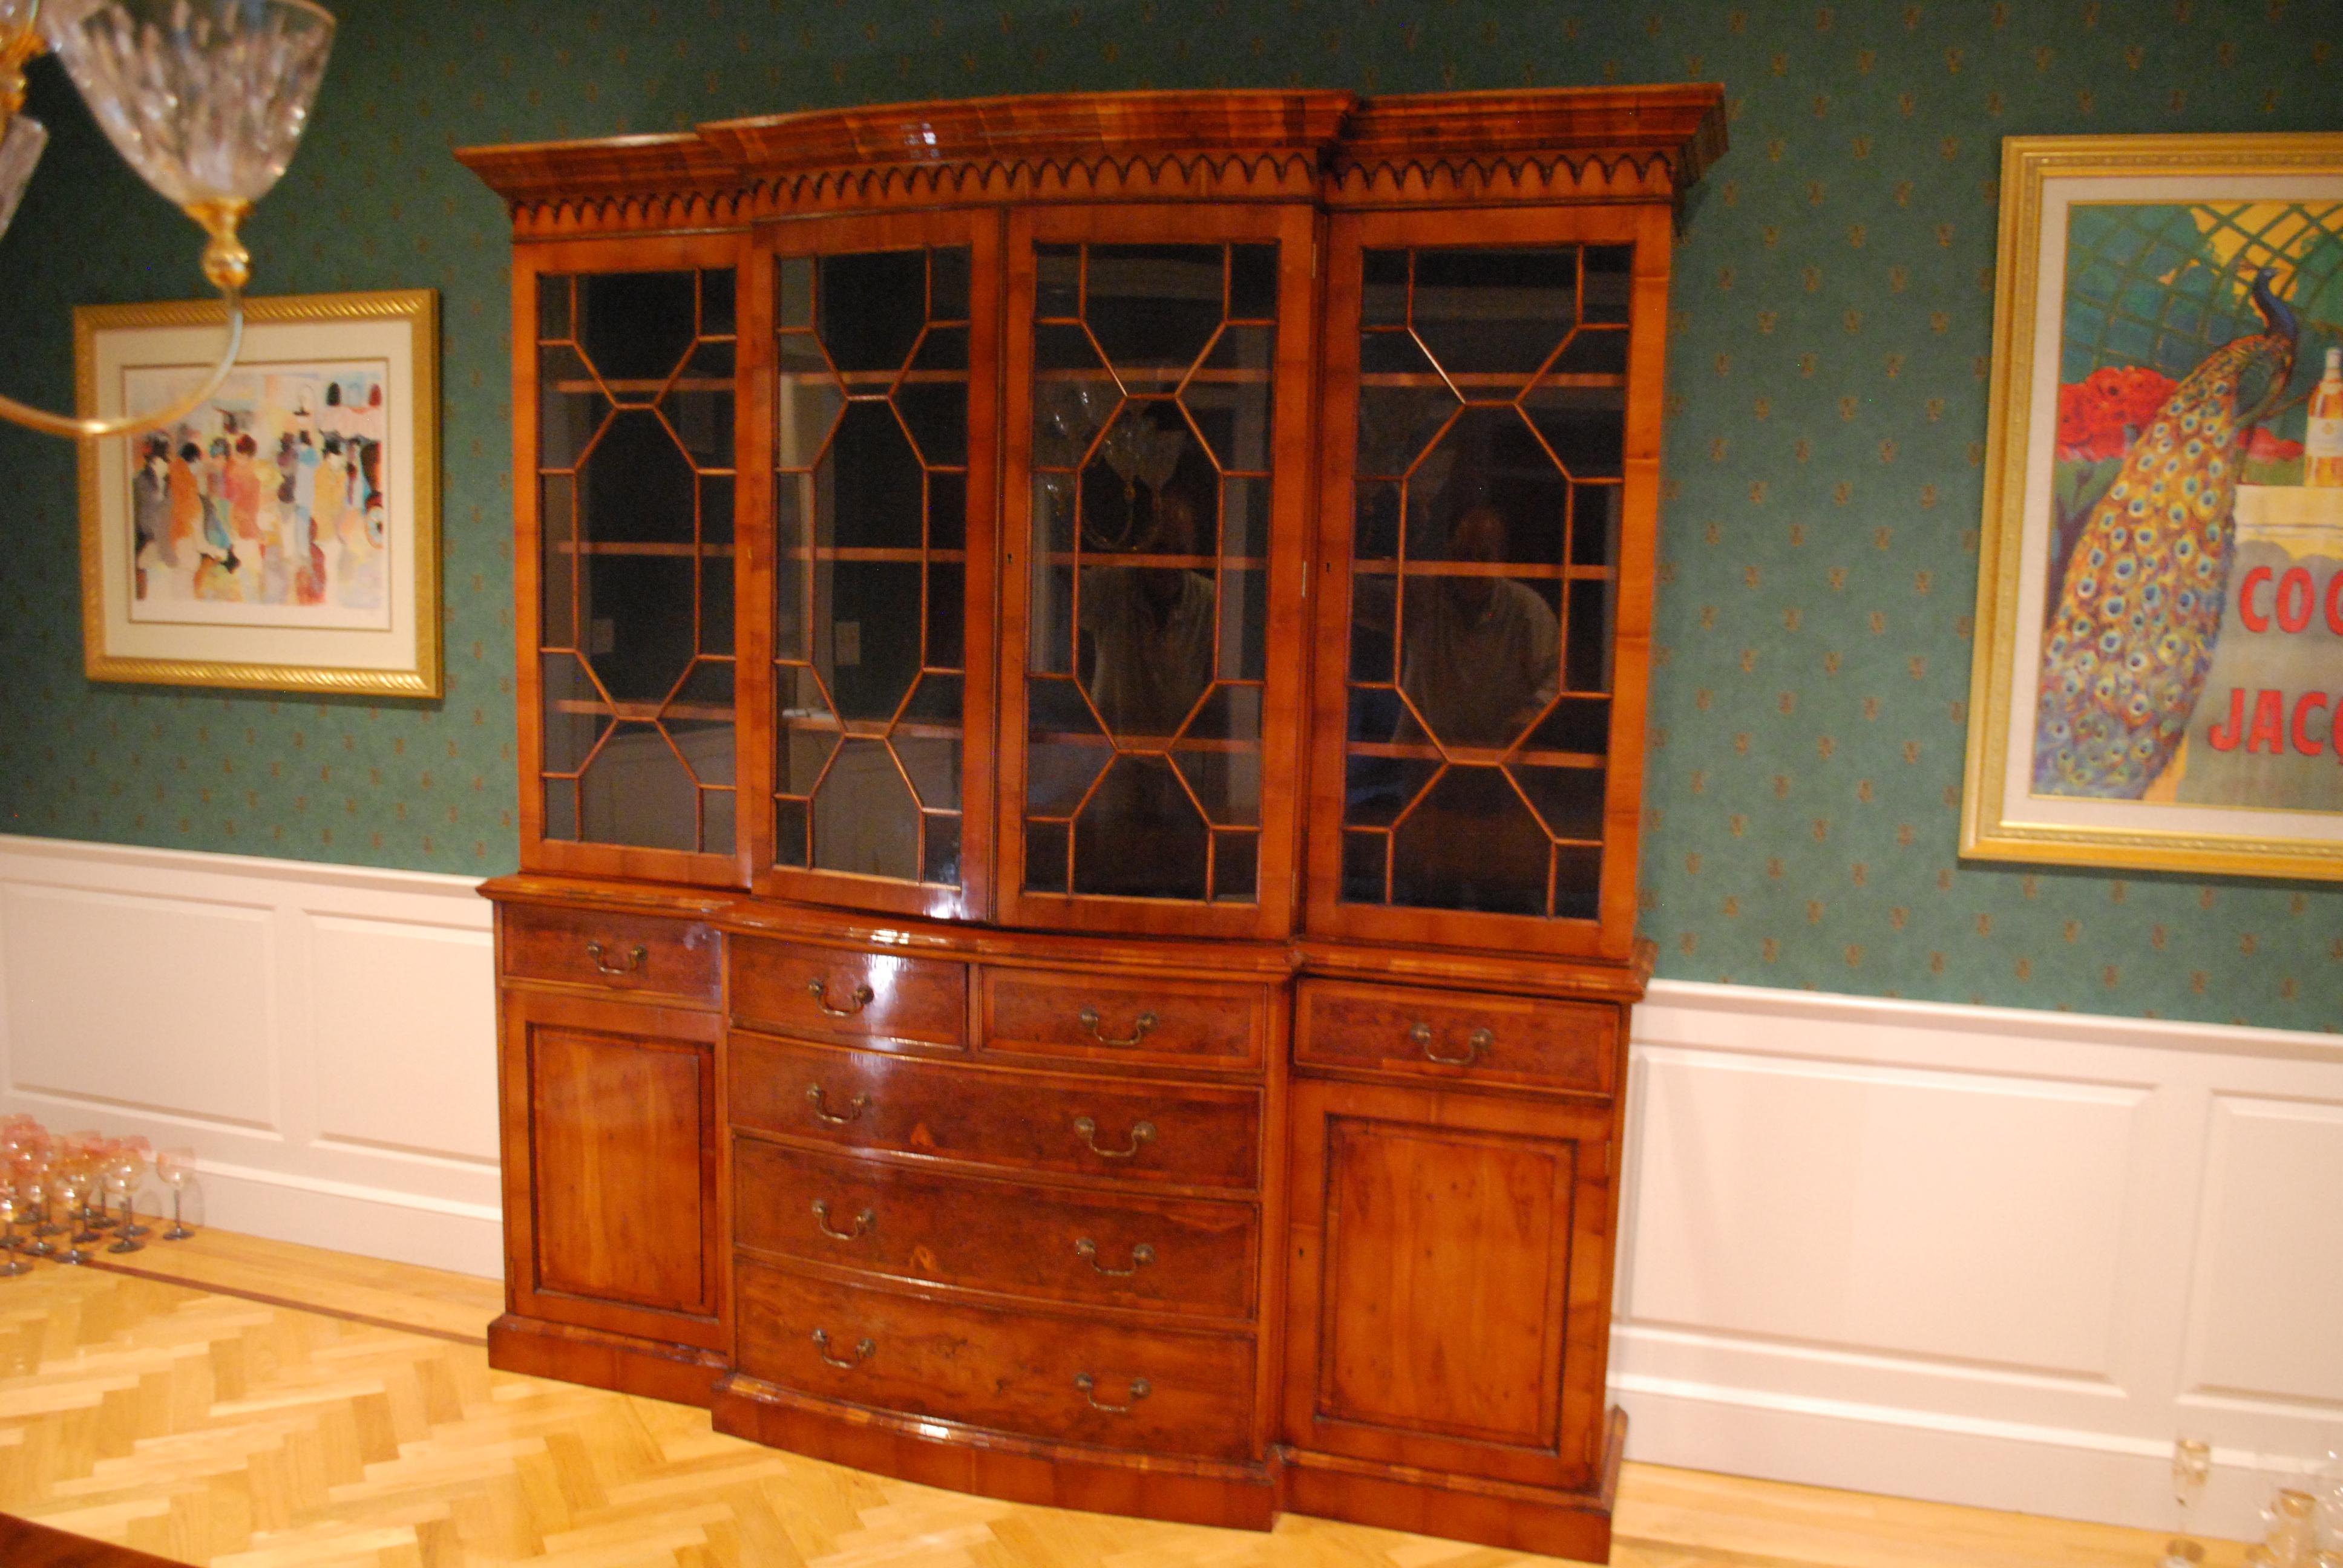 A four-door breakfront cabinet by Mill House Antiques - Reproductions, made in Yew, 1992. 
Measures: 85 1/2